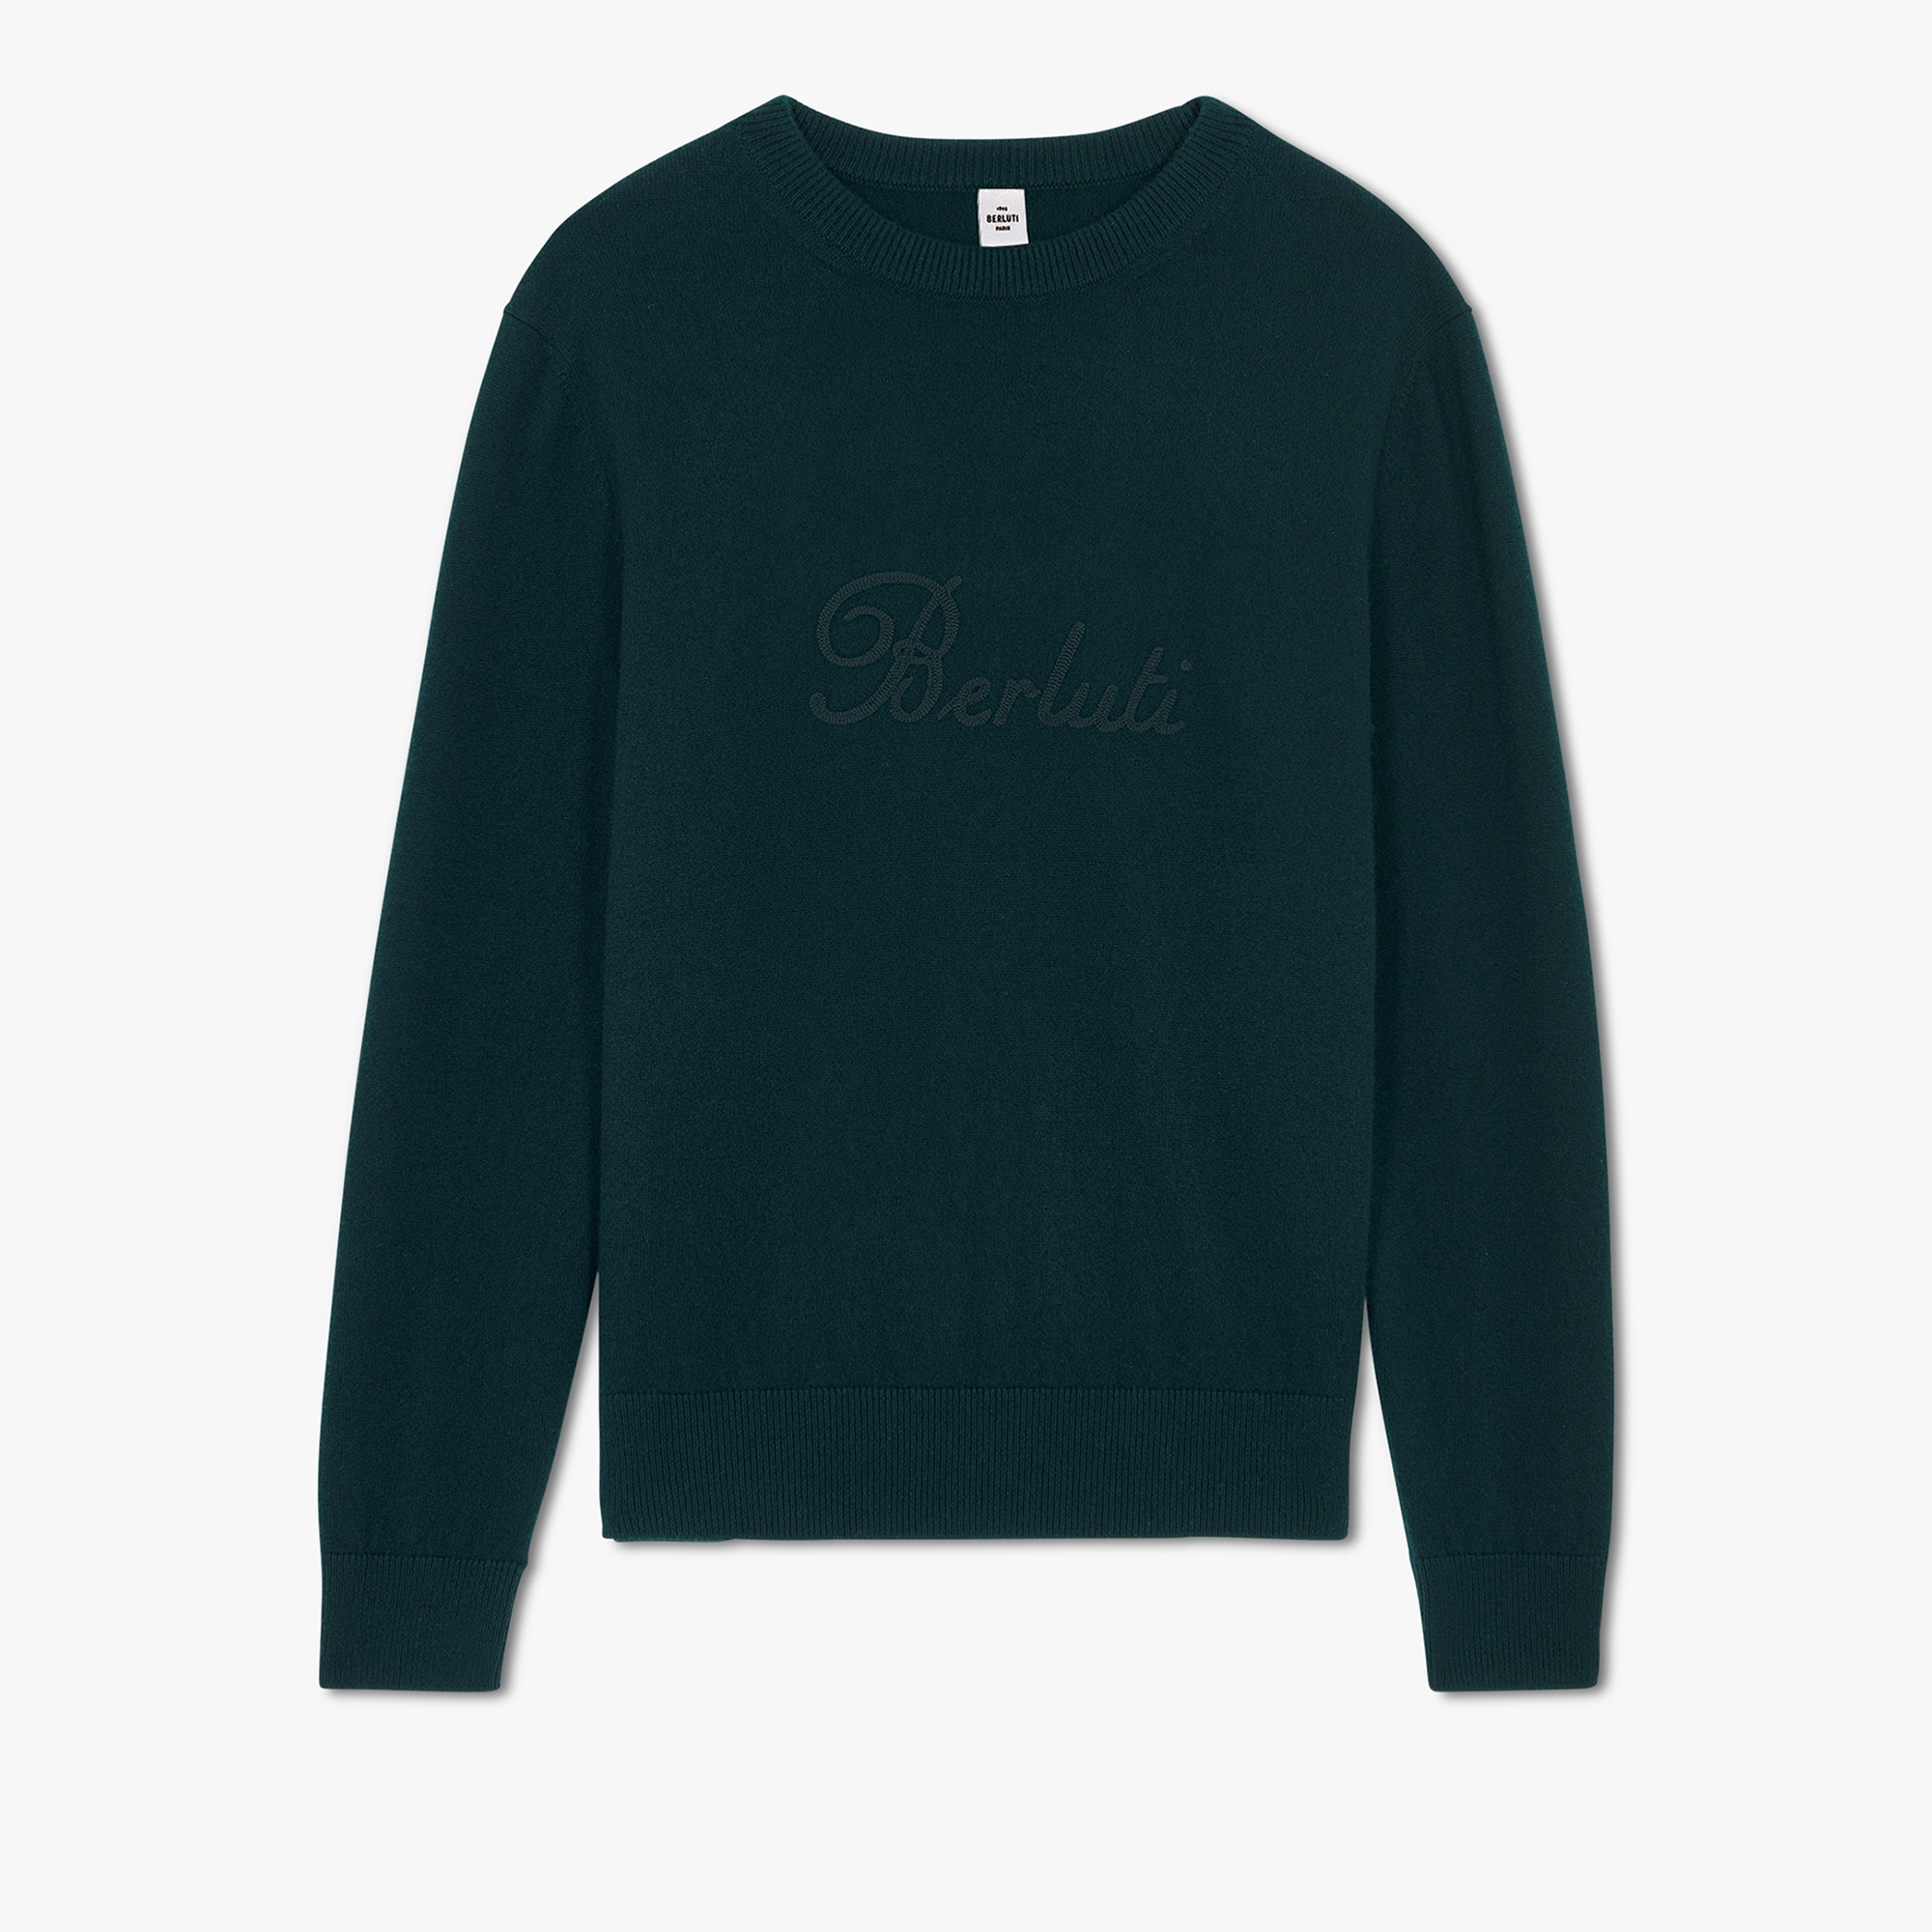 Cashmere Sweater With Thabor Embroidery, DARK GREEN, hi-res